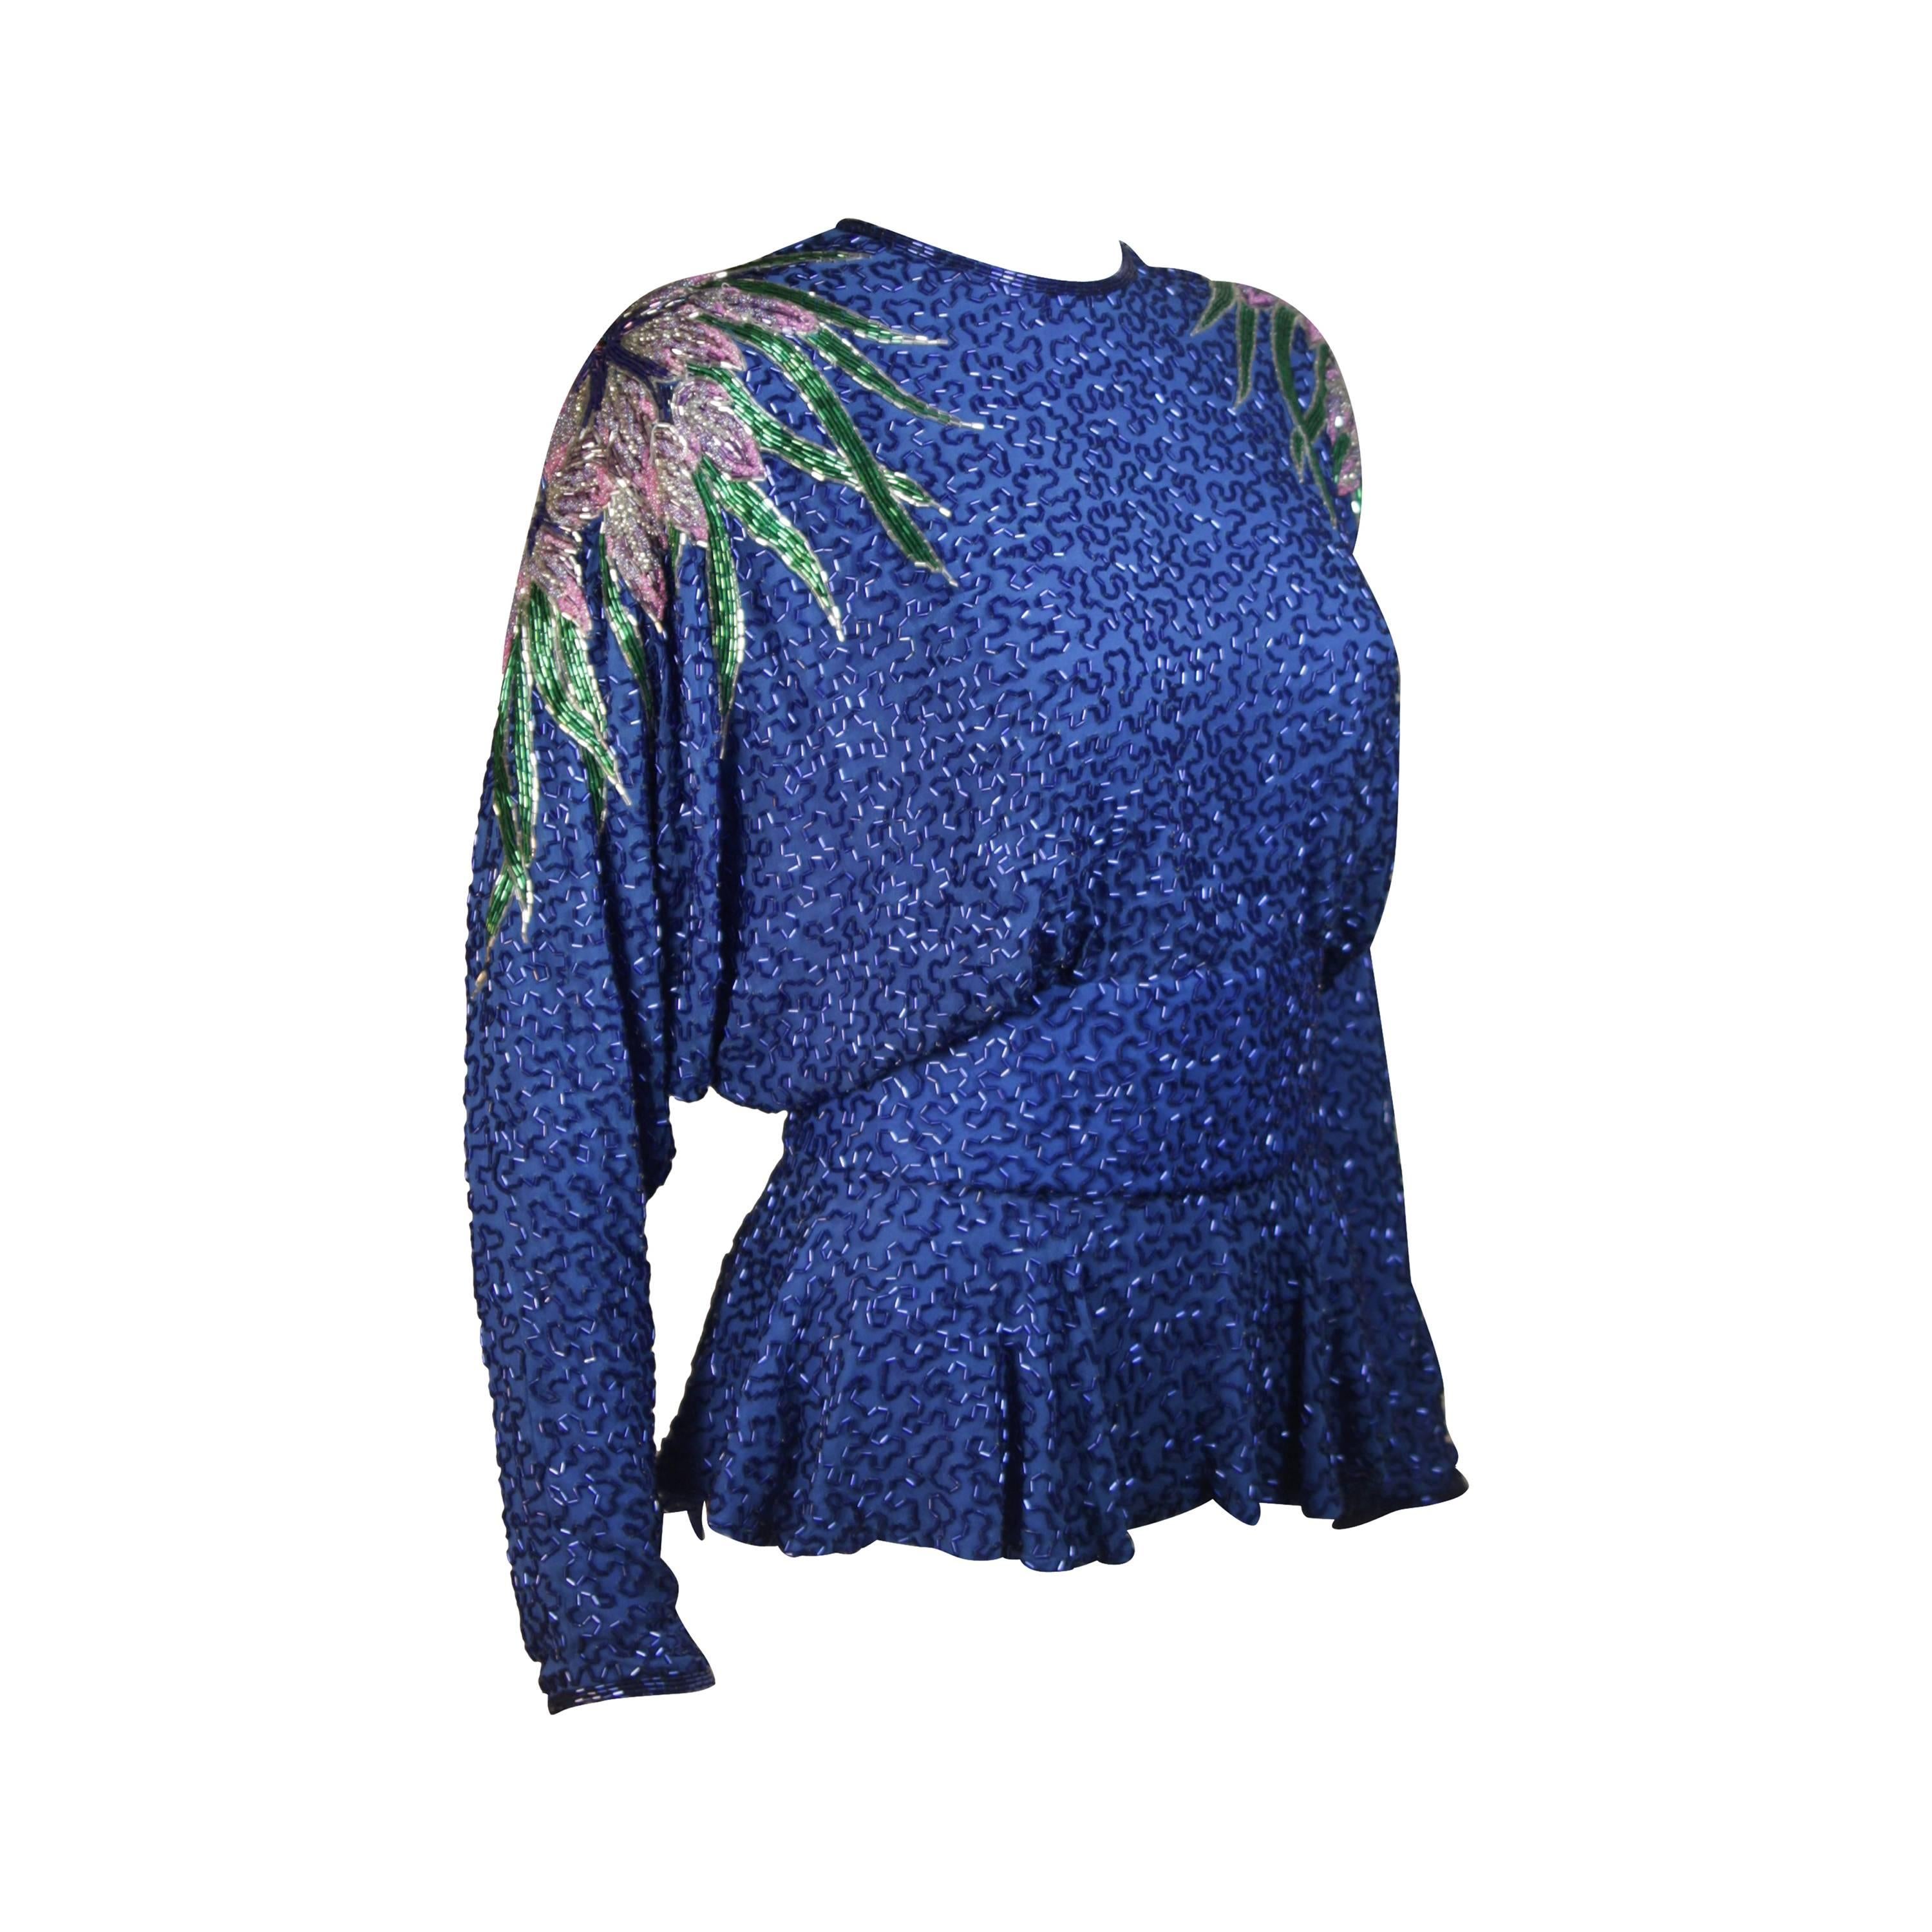 STEPHEN YEARIK Beaded Blouse with Open Back and Floral Motif Size 4-6 For Sale